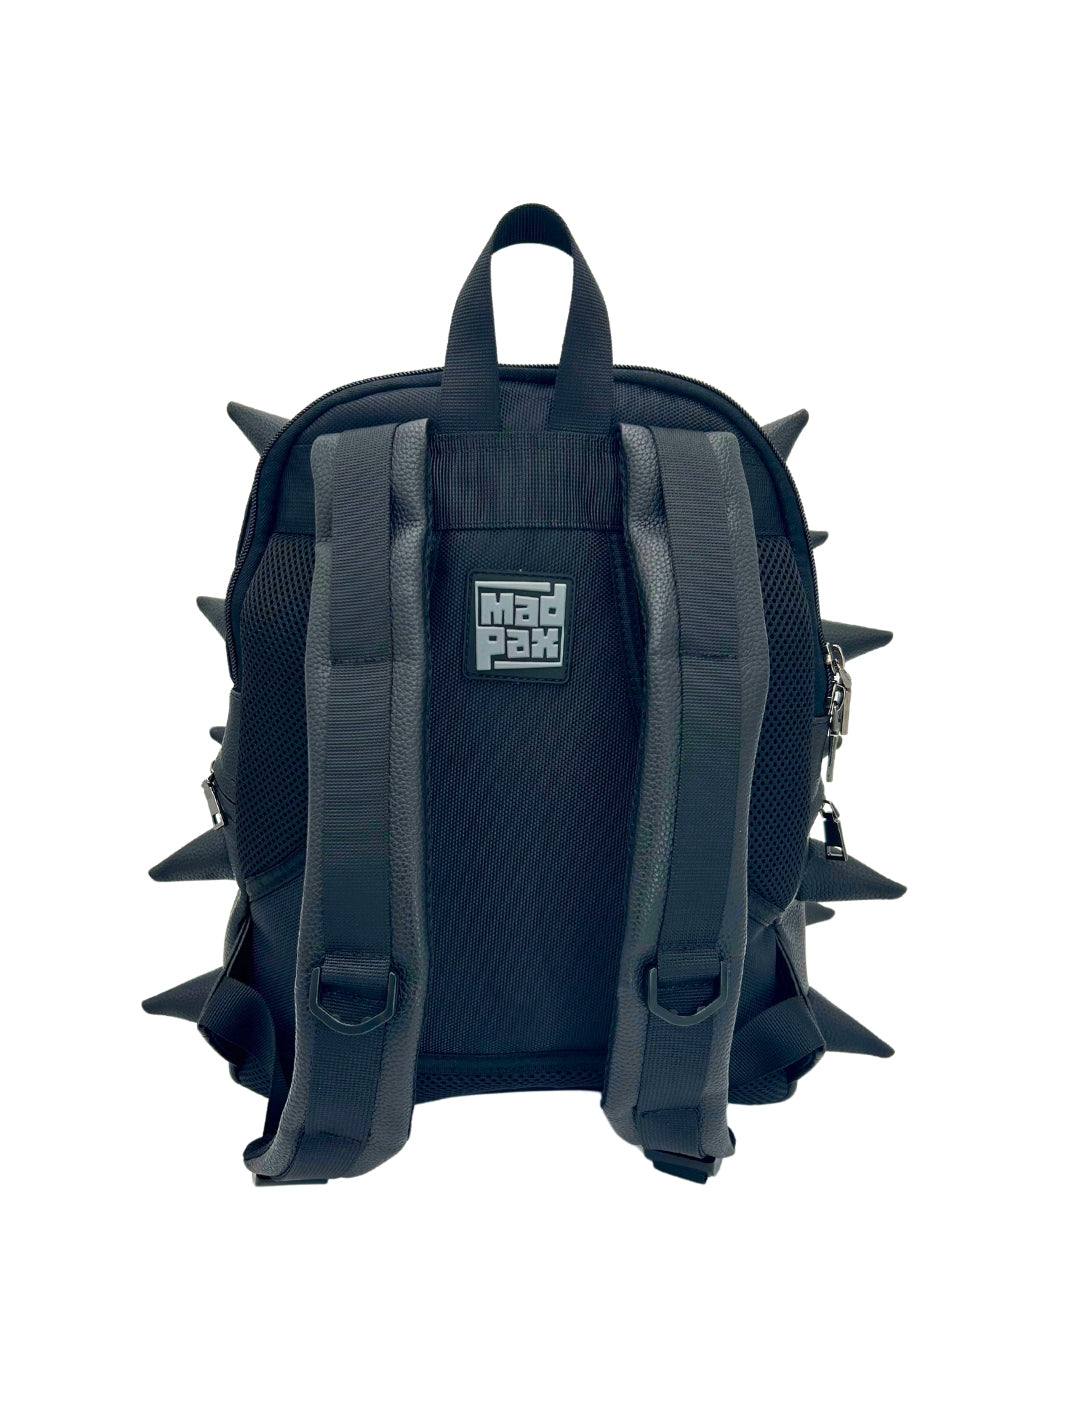 Black Daypack | Got Your Black by Madpax Back View